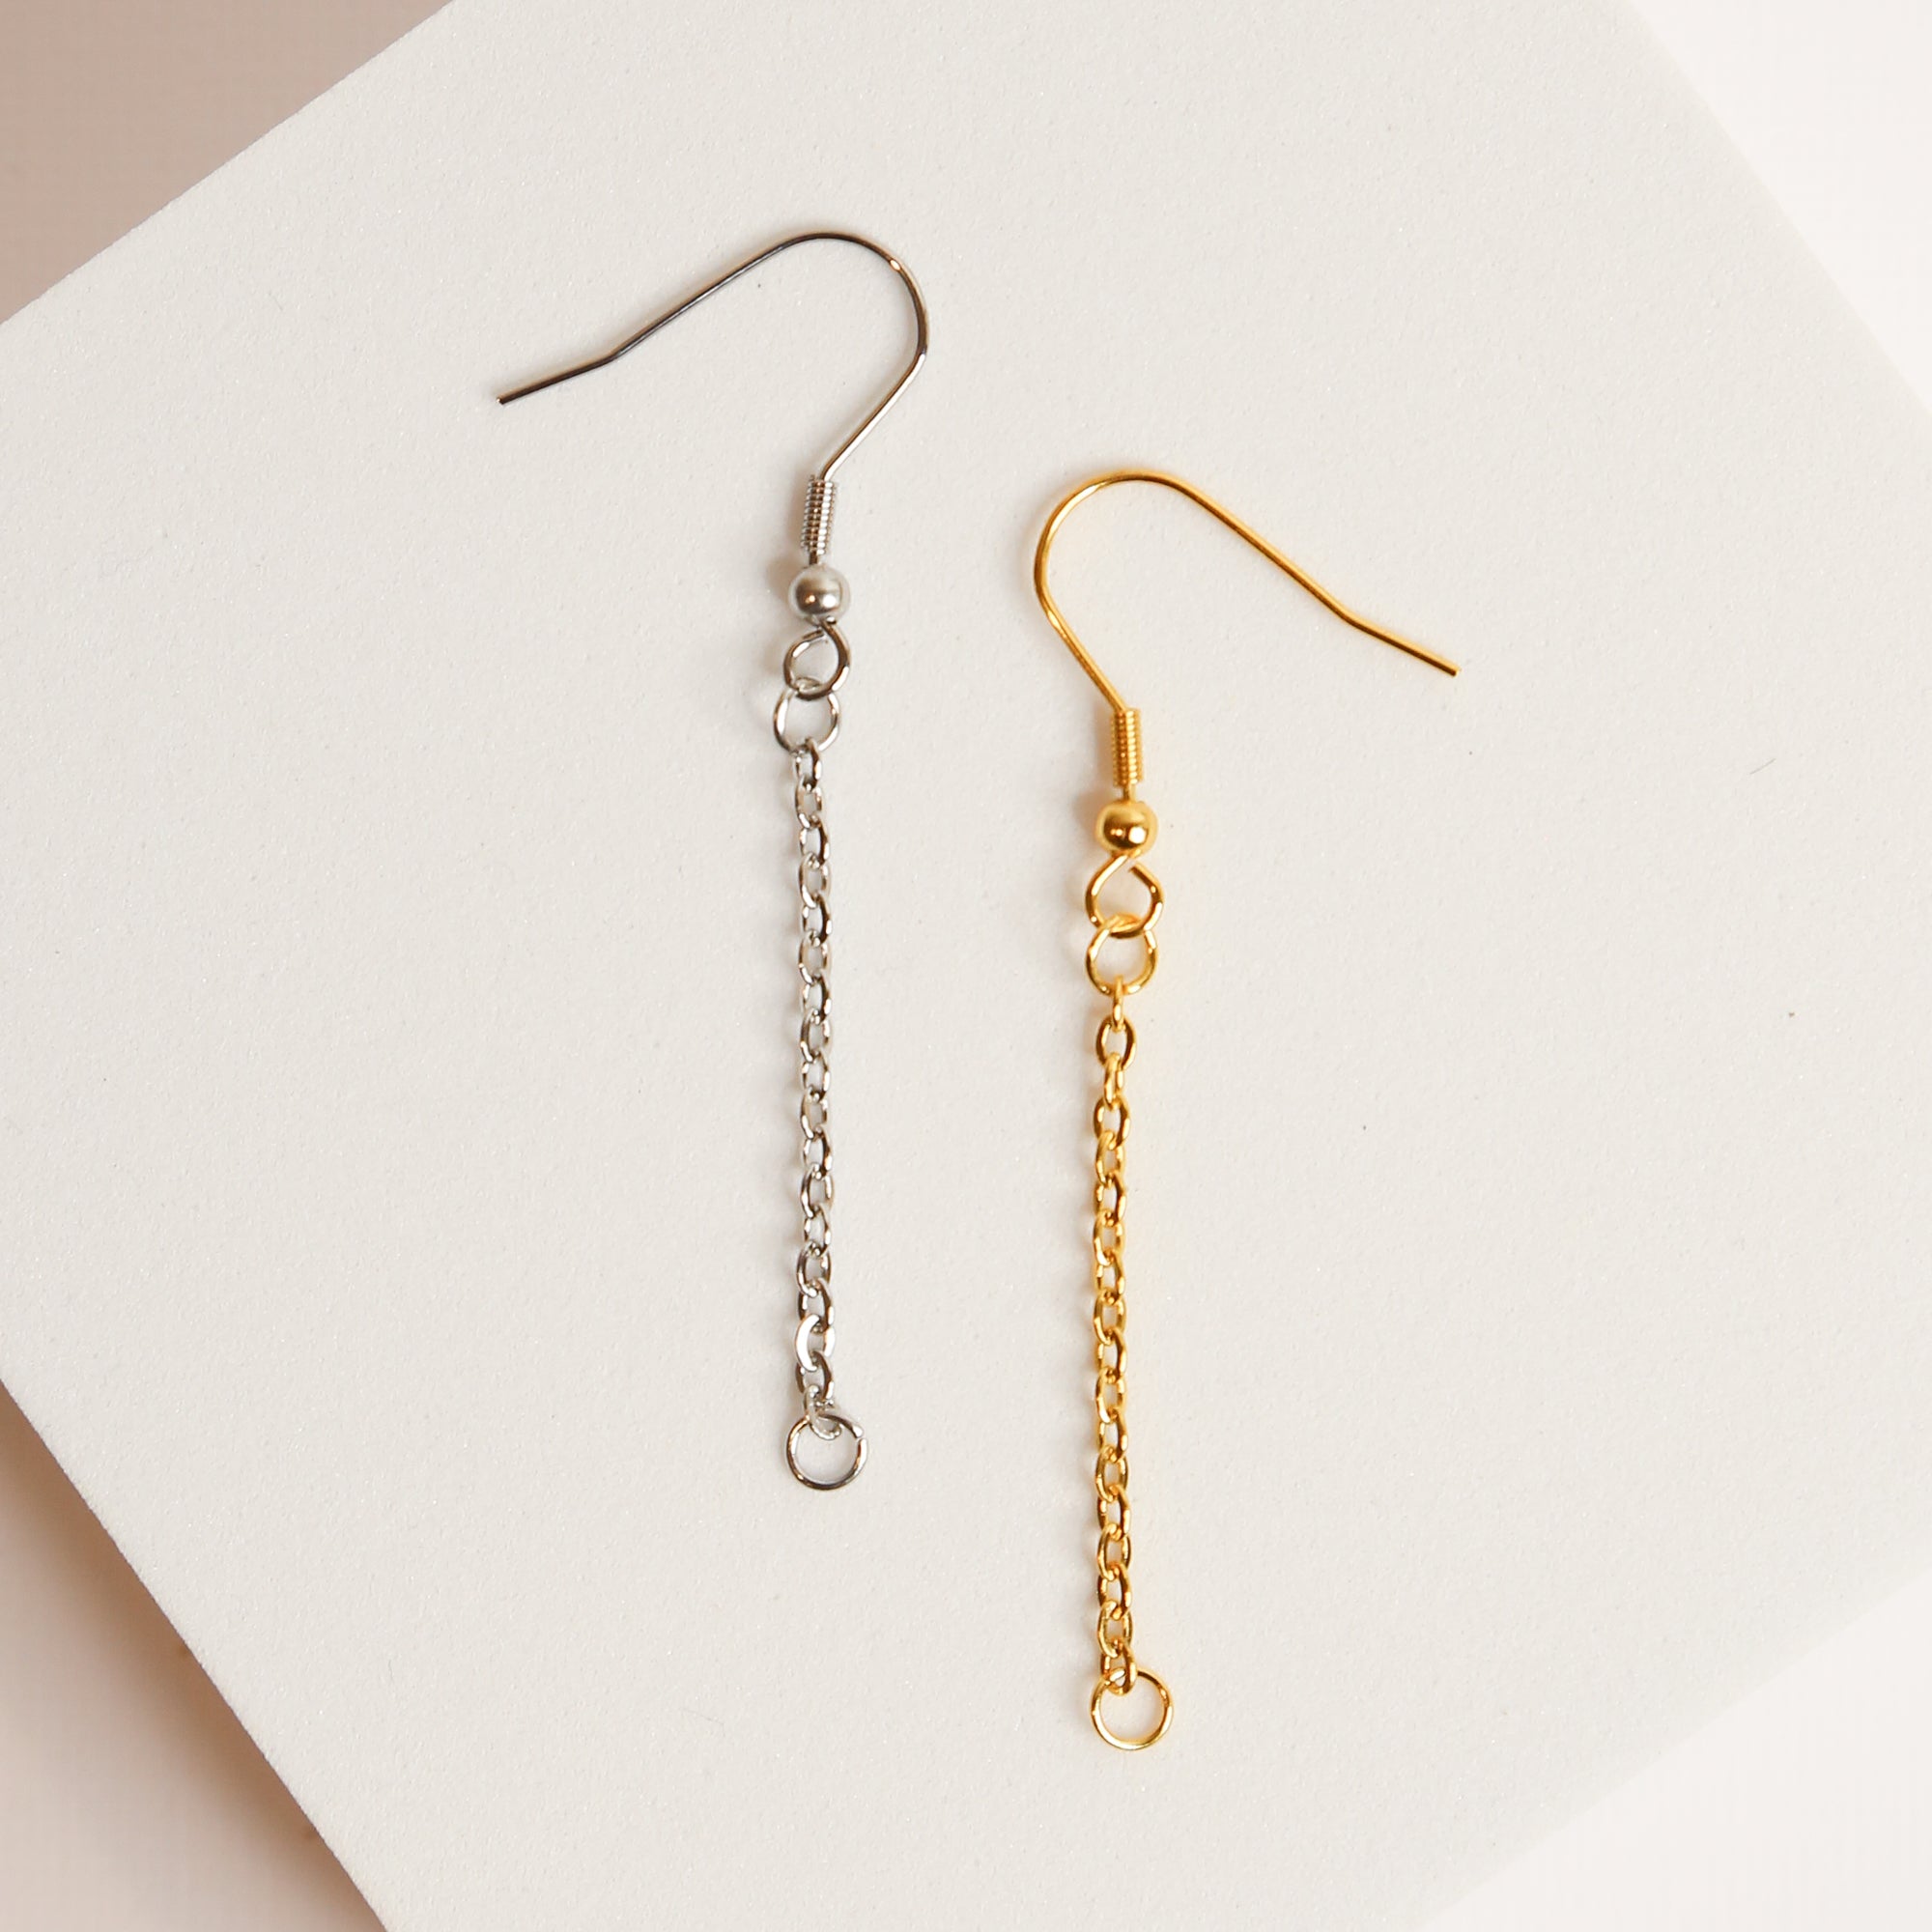 Earring Chain Drop with Hooks - 10 pieces